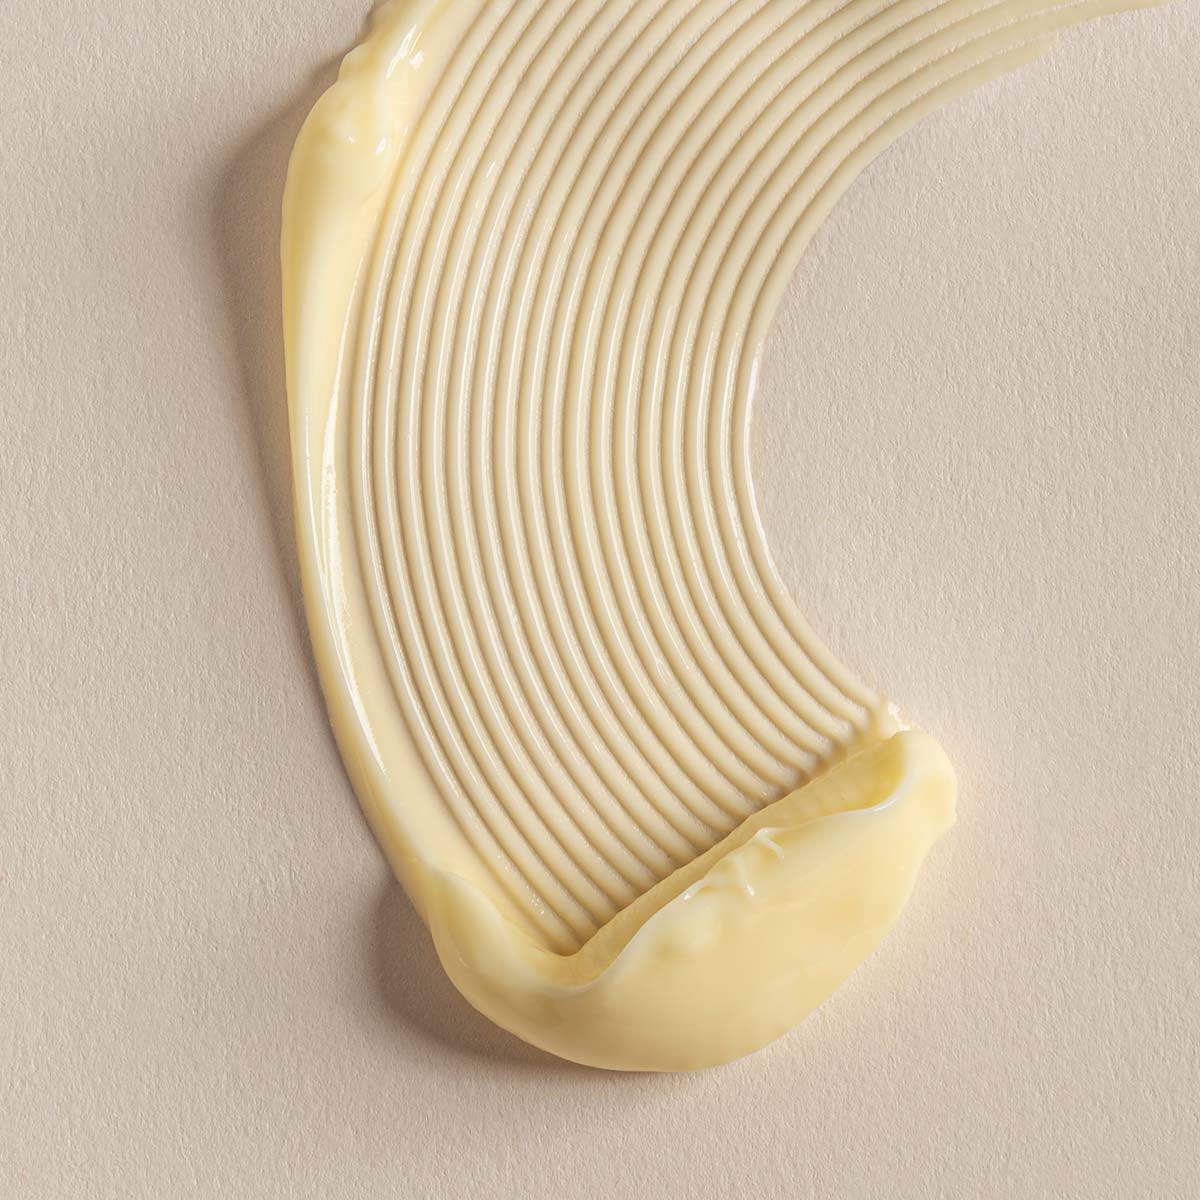 hydrating face cream with a yellow color